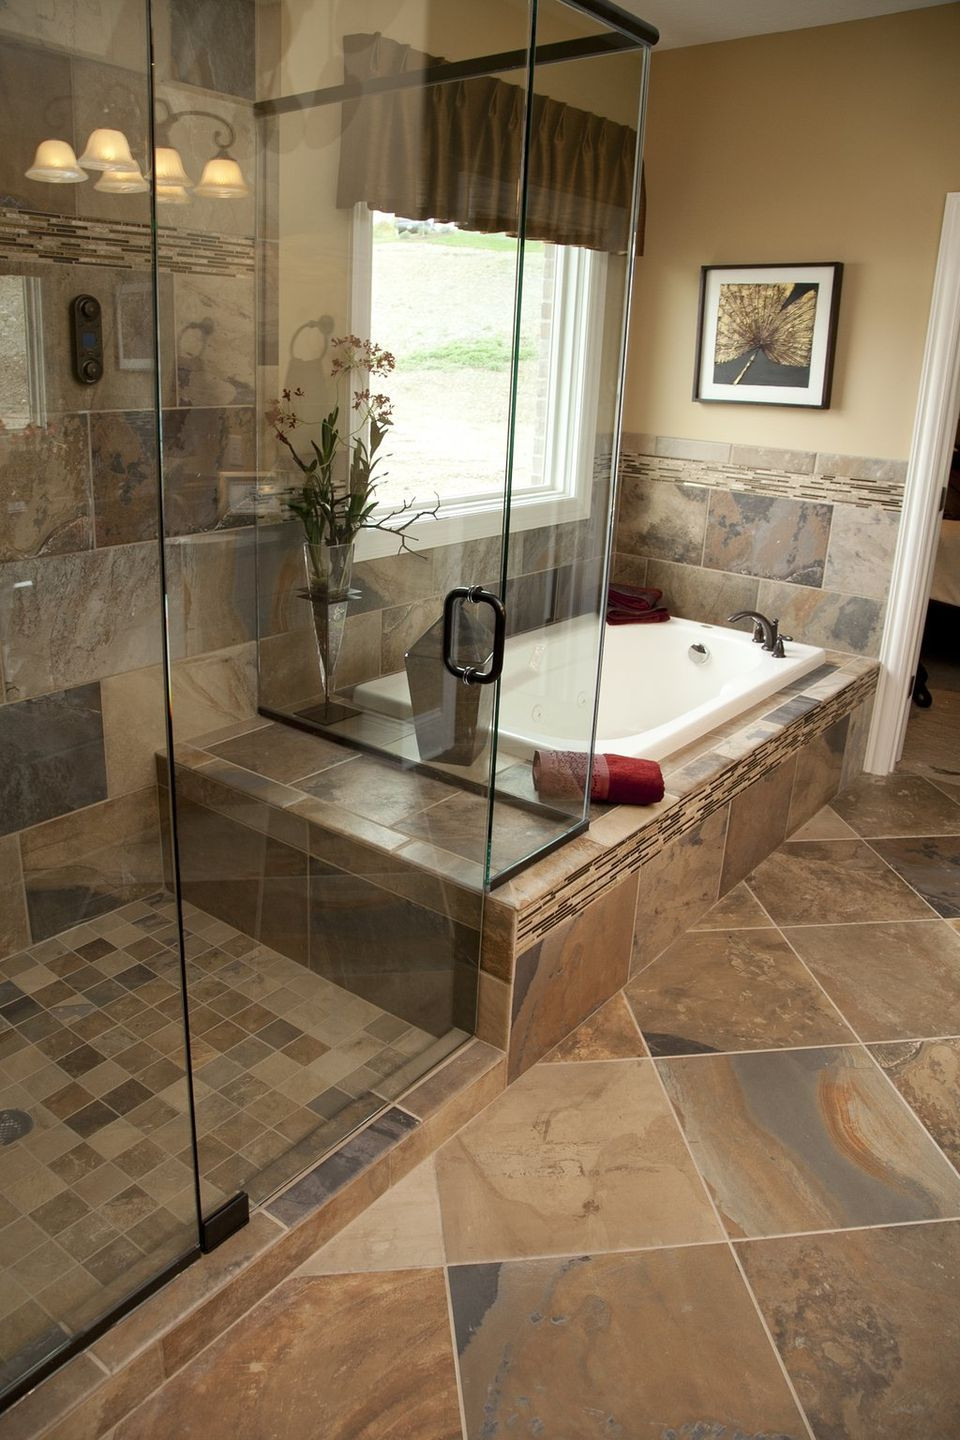 Bathroom Shower Floor Tile Ideas
 33 stunning pictures and ideas of natural stone bathroom